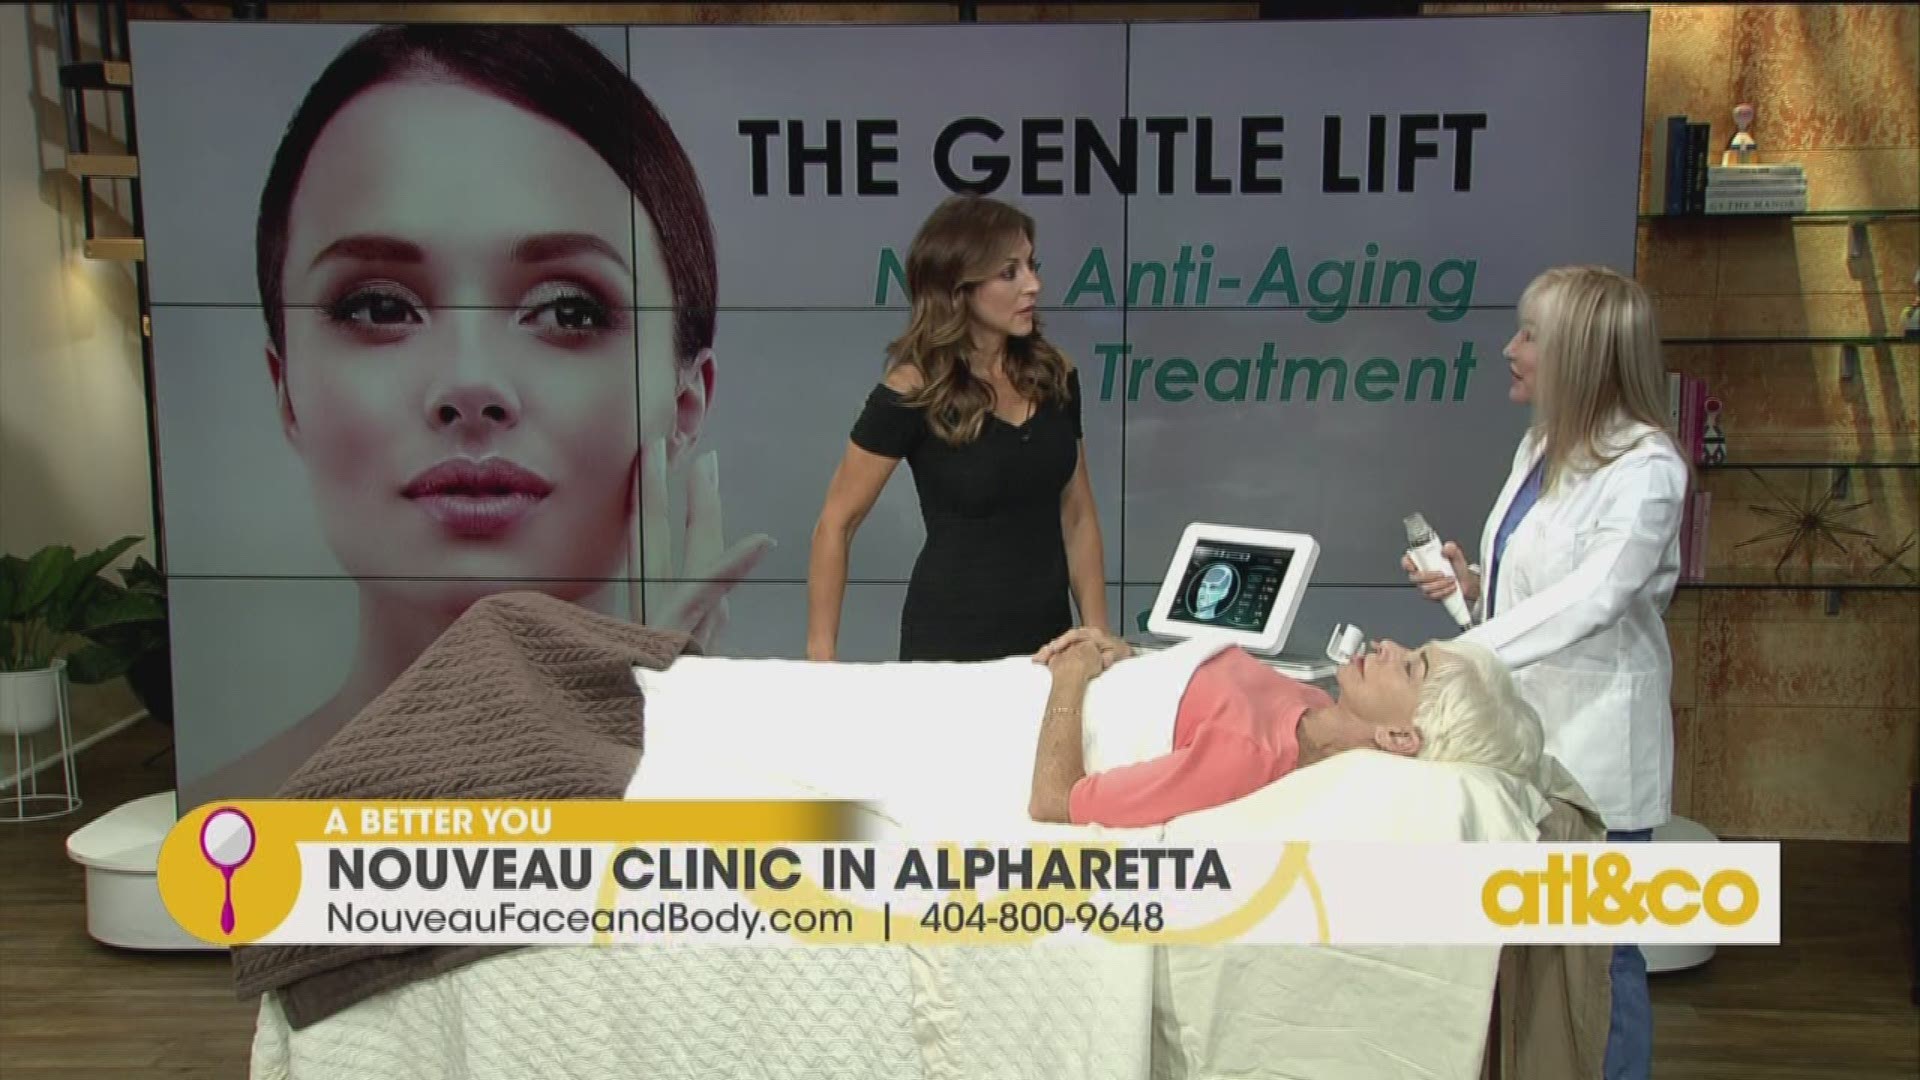 Check out Gentle Lift Anti-Aging with The Nouveau Clinic